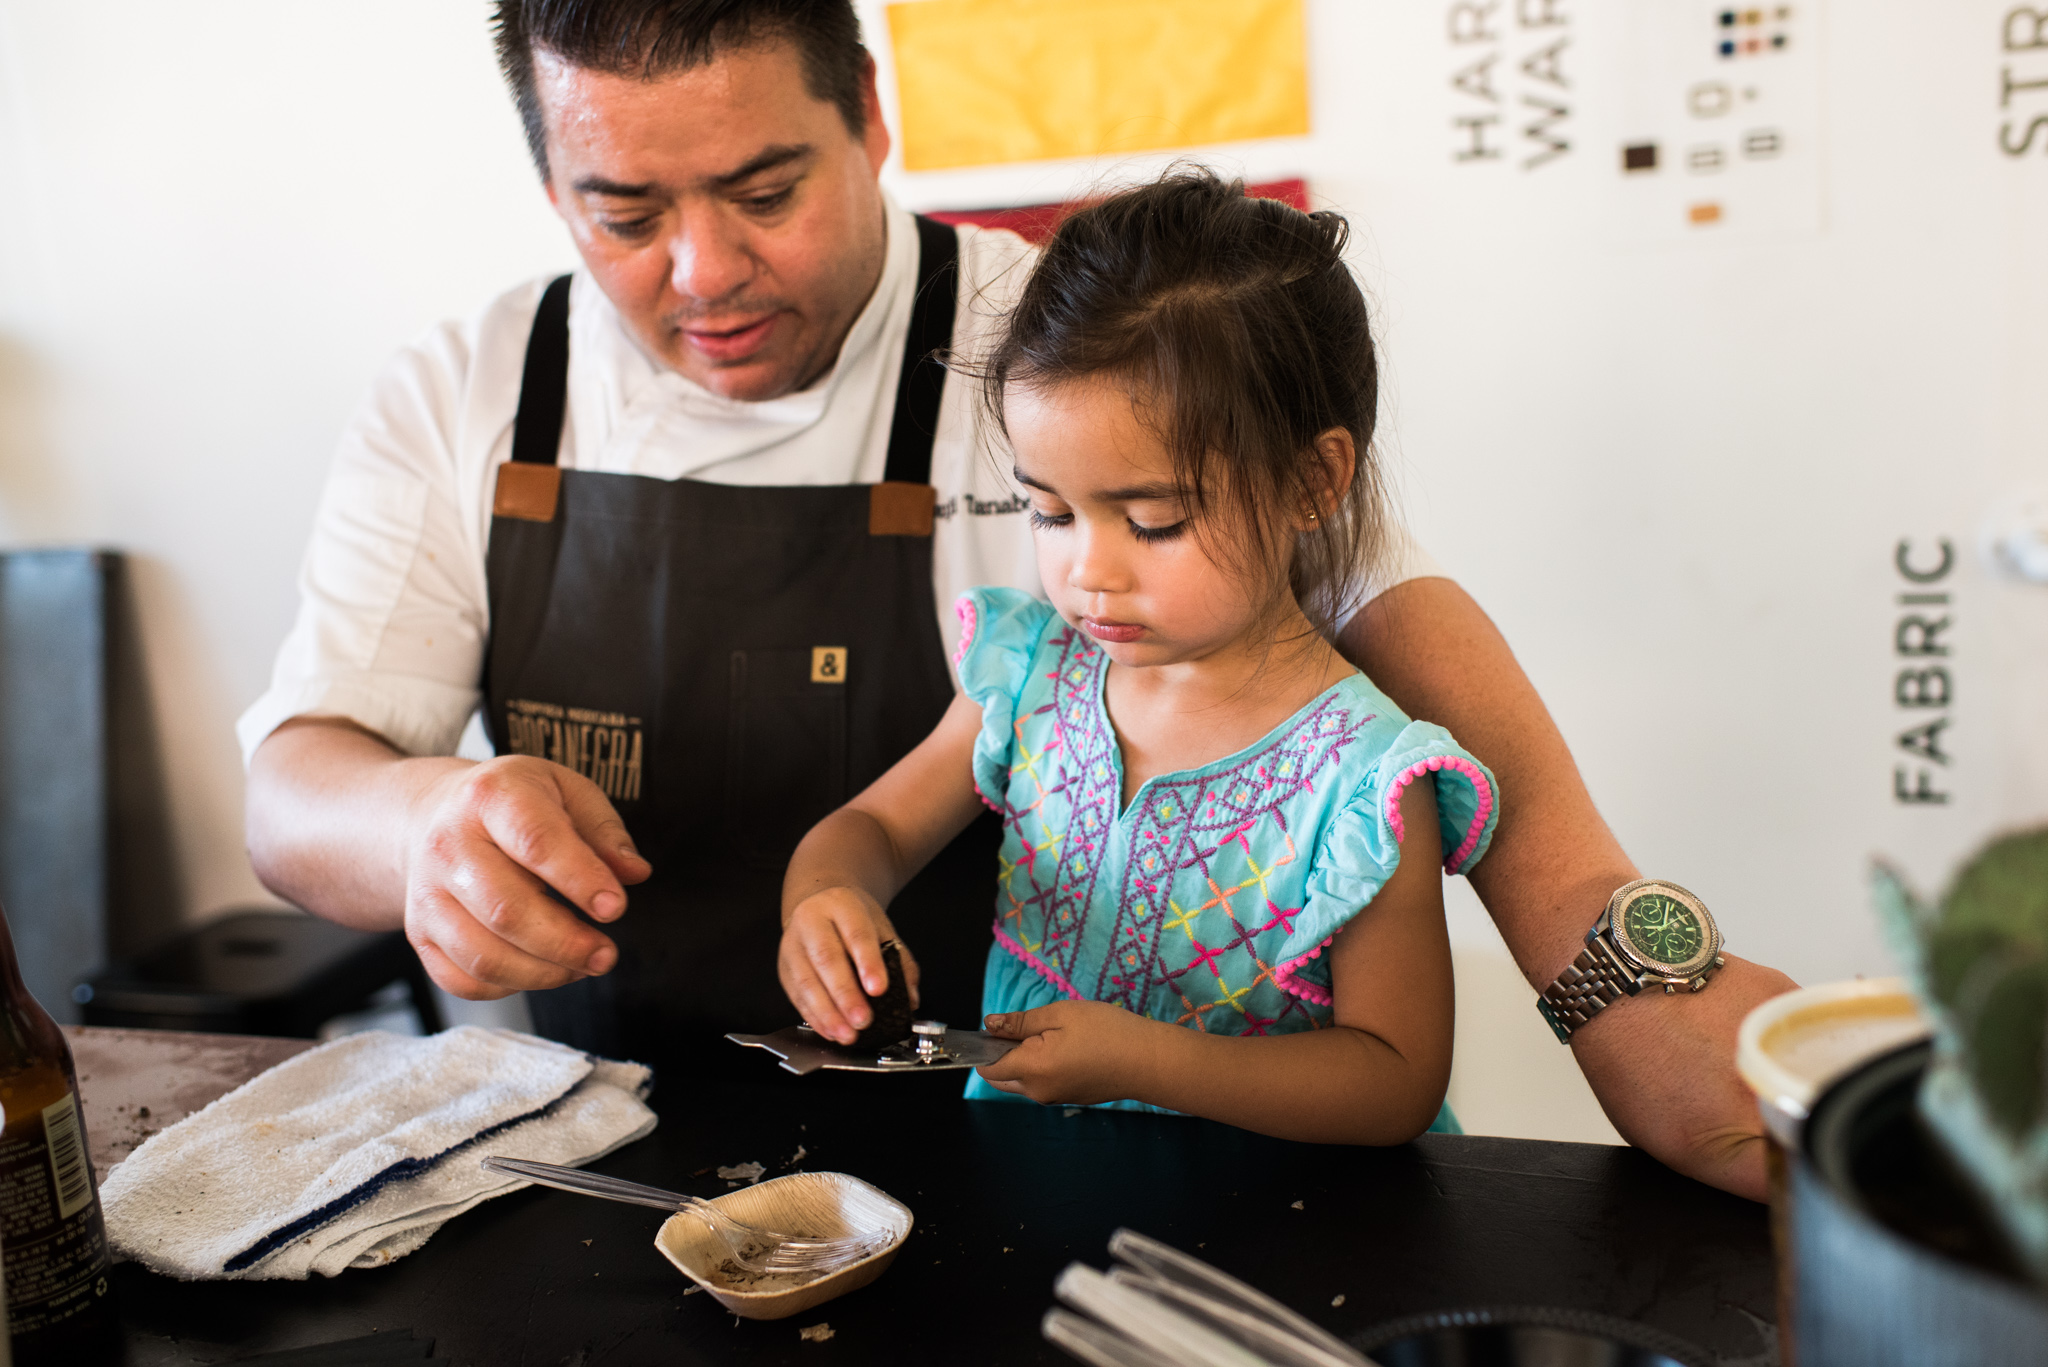 A local chef gets help slicing truffles from his daughter